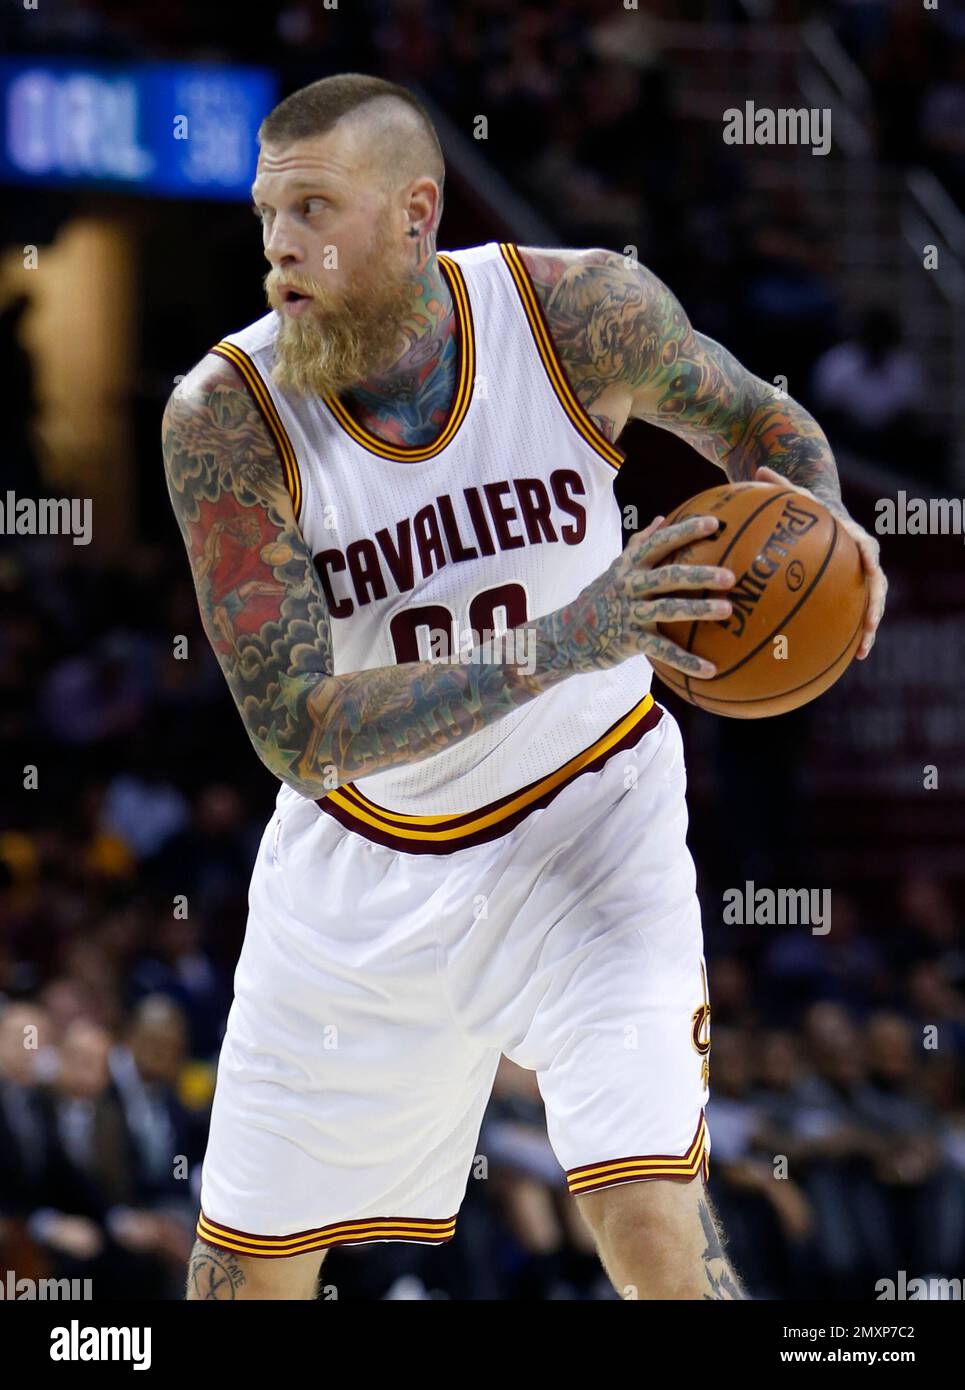 Cleveland Cavaliers: With Chris Andersen Out, What's Next?